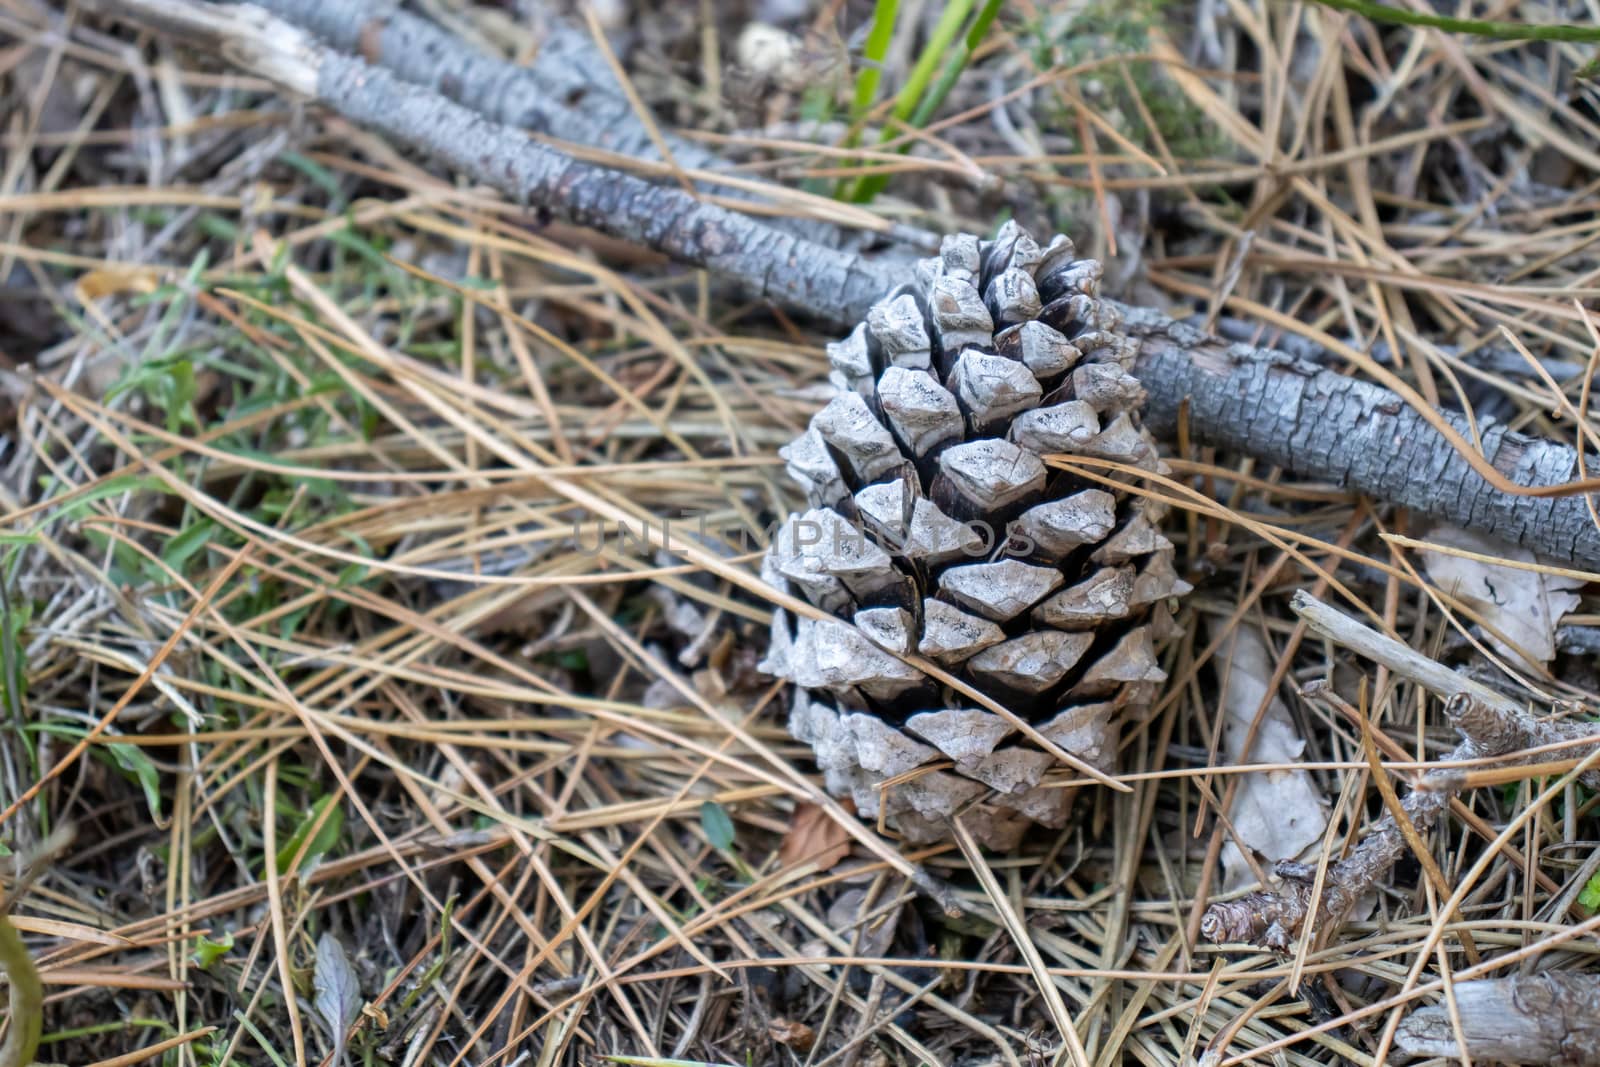 pine cone up close in the ground among the pine needles.